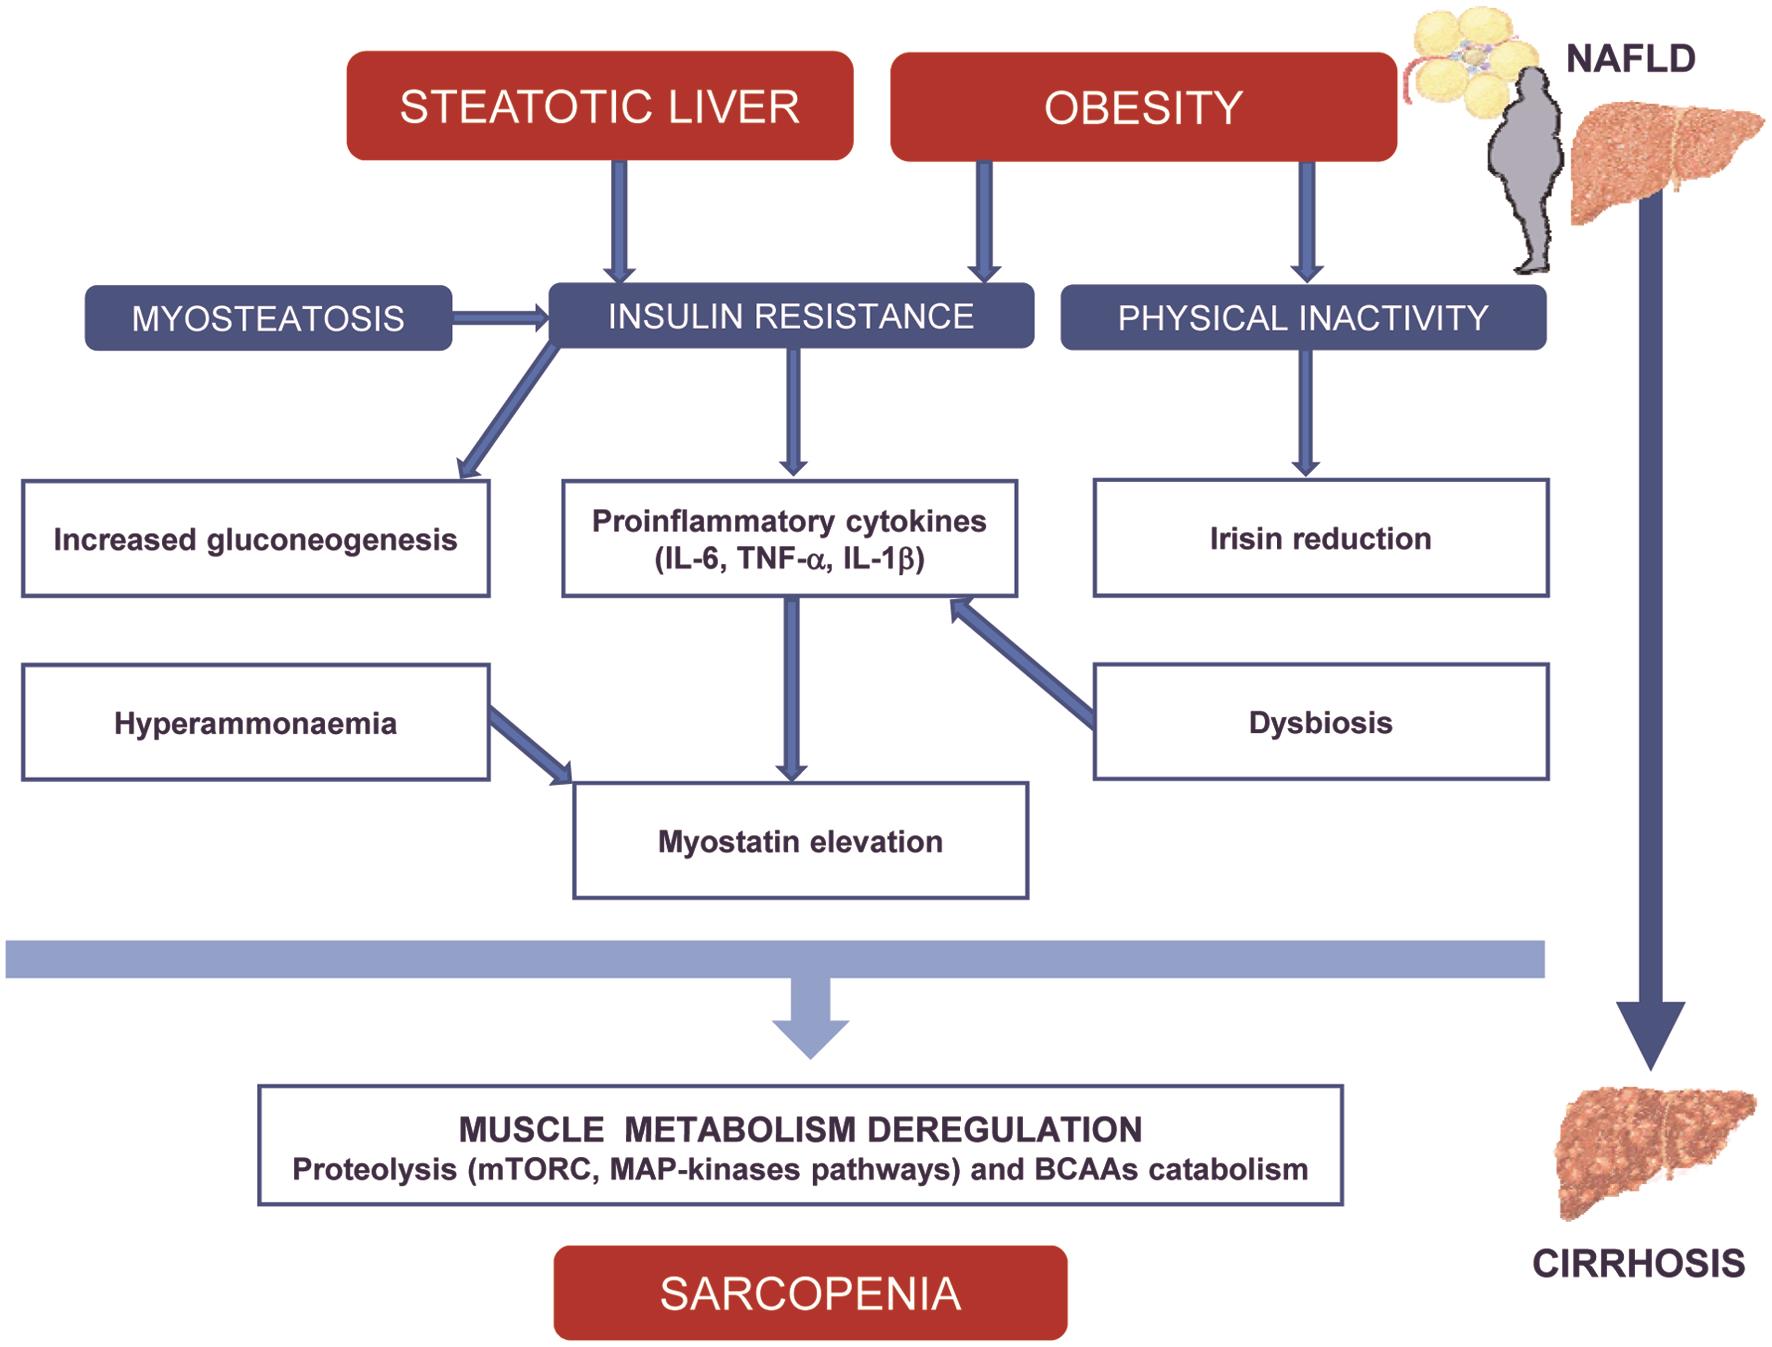 Liver-muscle-adipose tissue axis deregulation as the trigger of sarcopenia during the natural history of NAFLD.